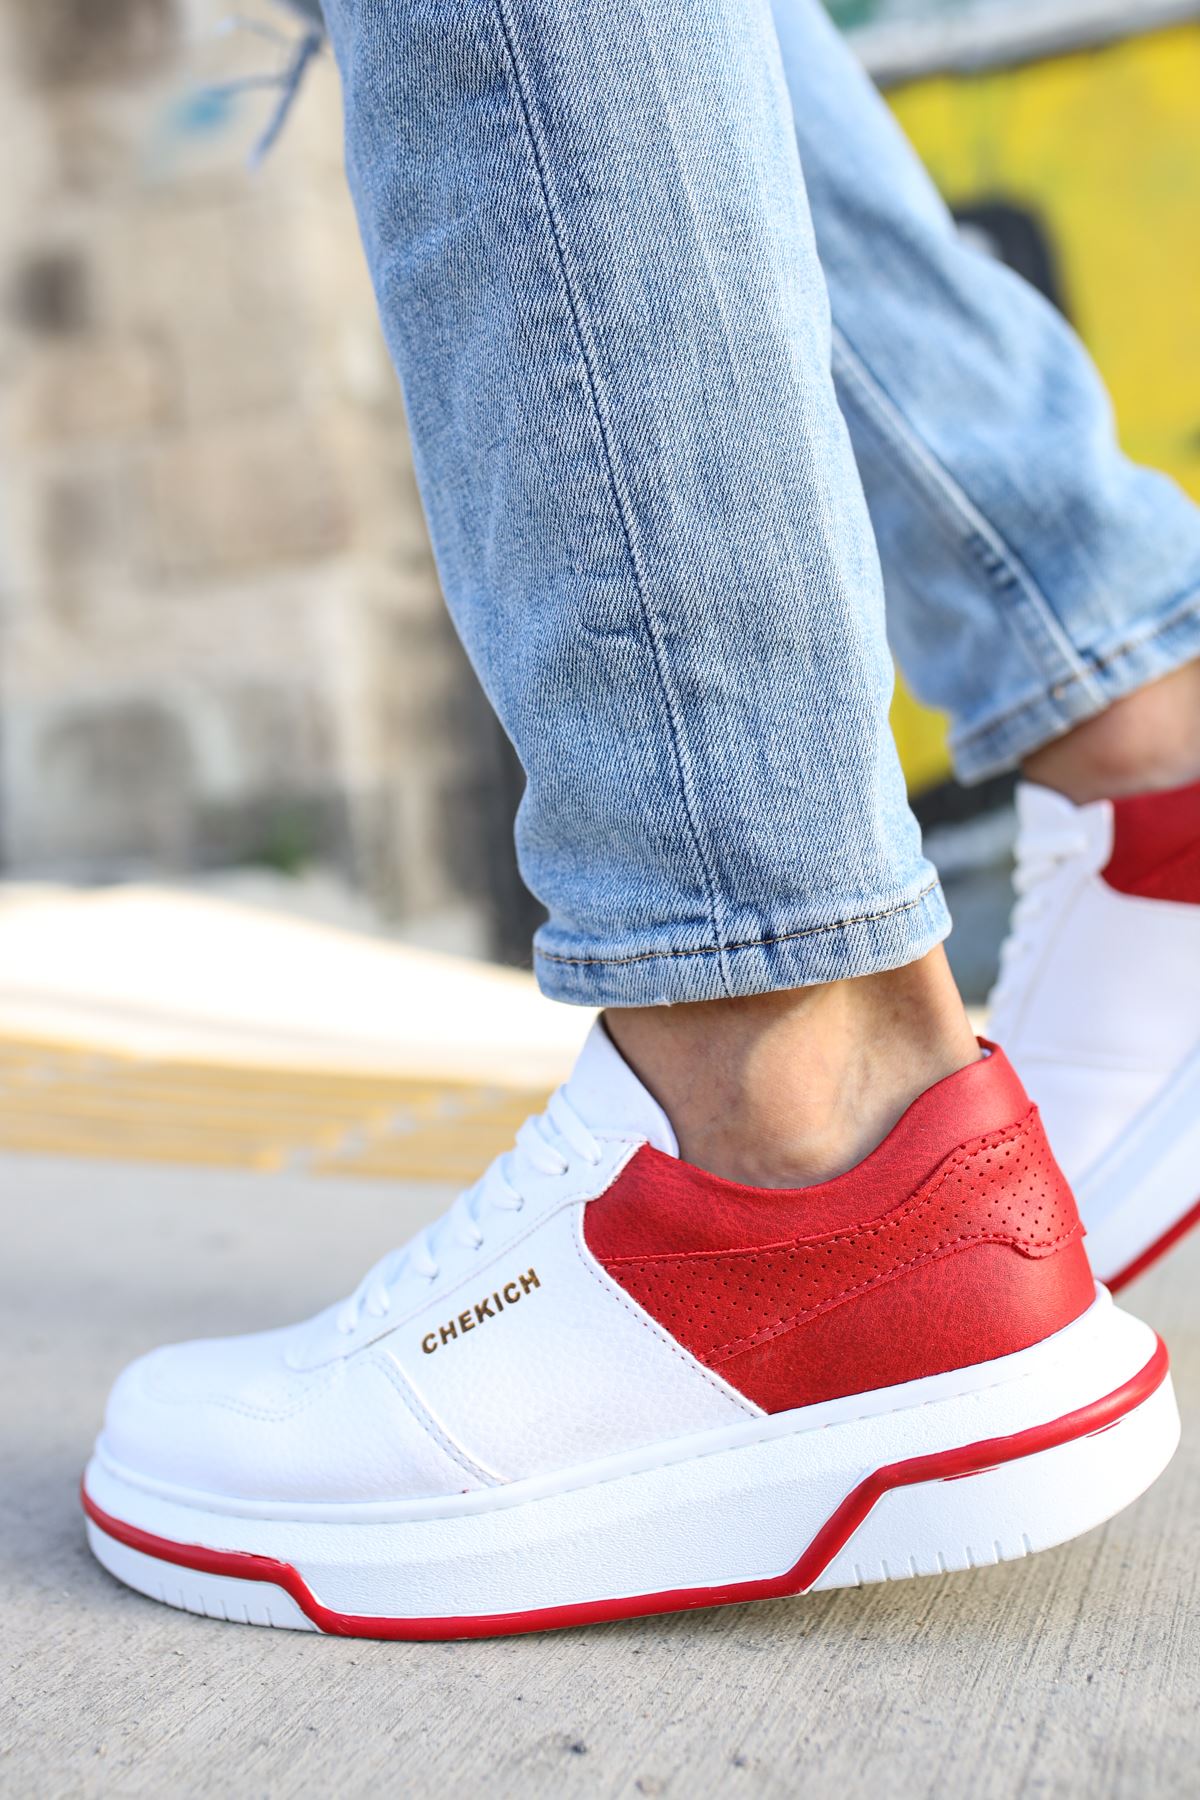 CH075 Men's Unisex White-Red Casual Sneaker Sports Shoes - STREETMODE ™